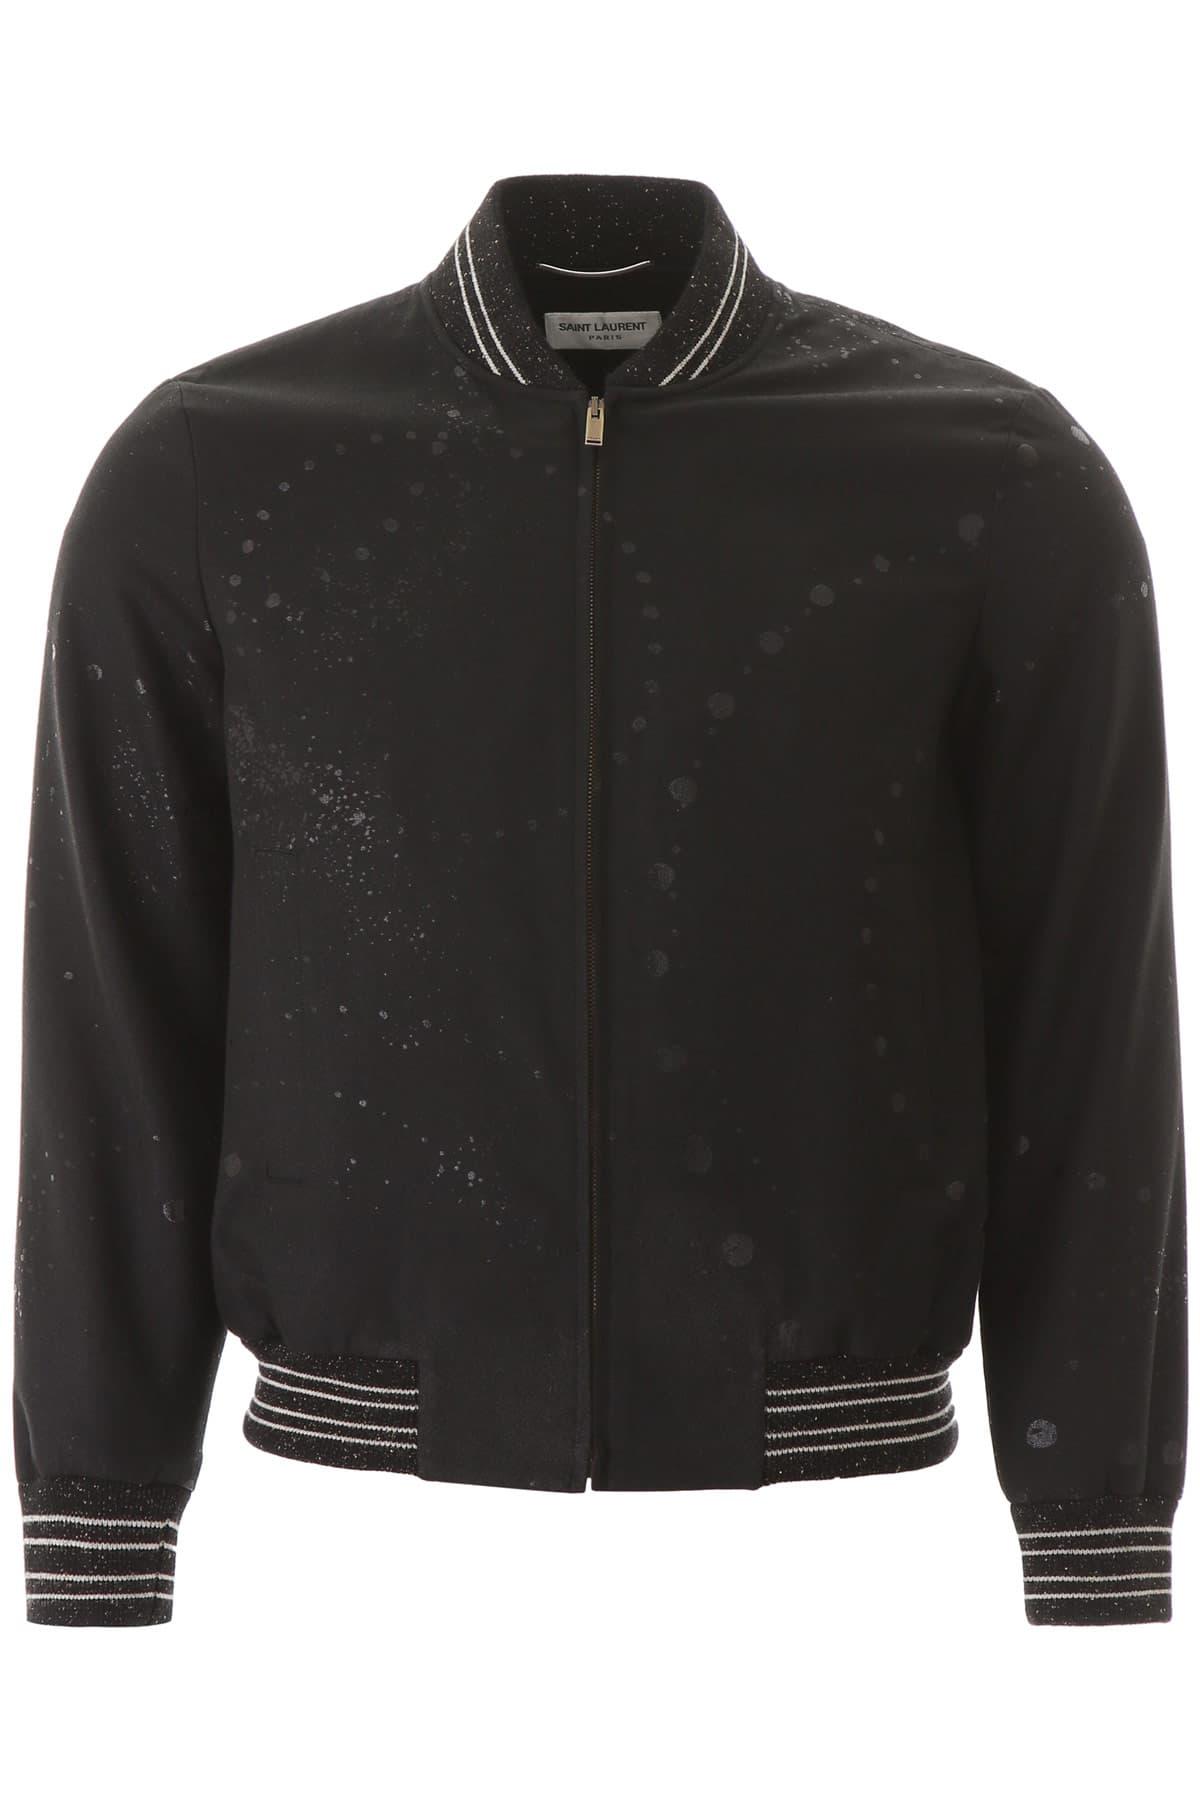 Saint Laurent Synthetic Galaxy Teddy Bomber Jacket in Black for Men - Lyst